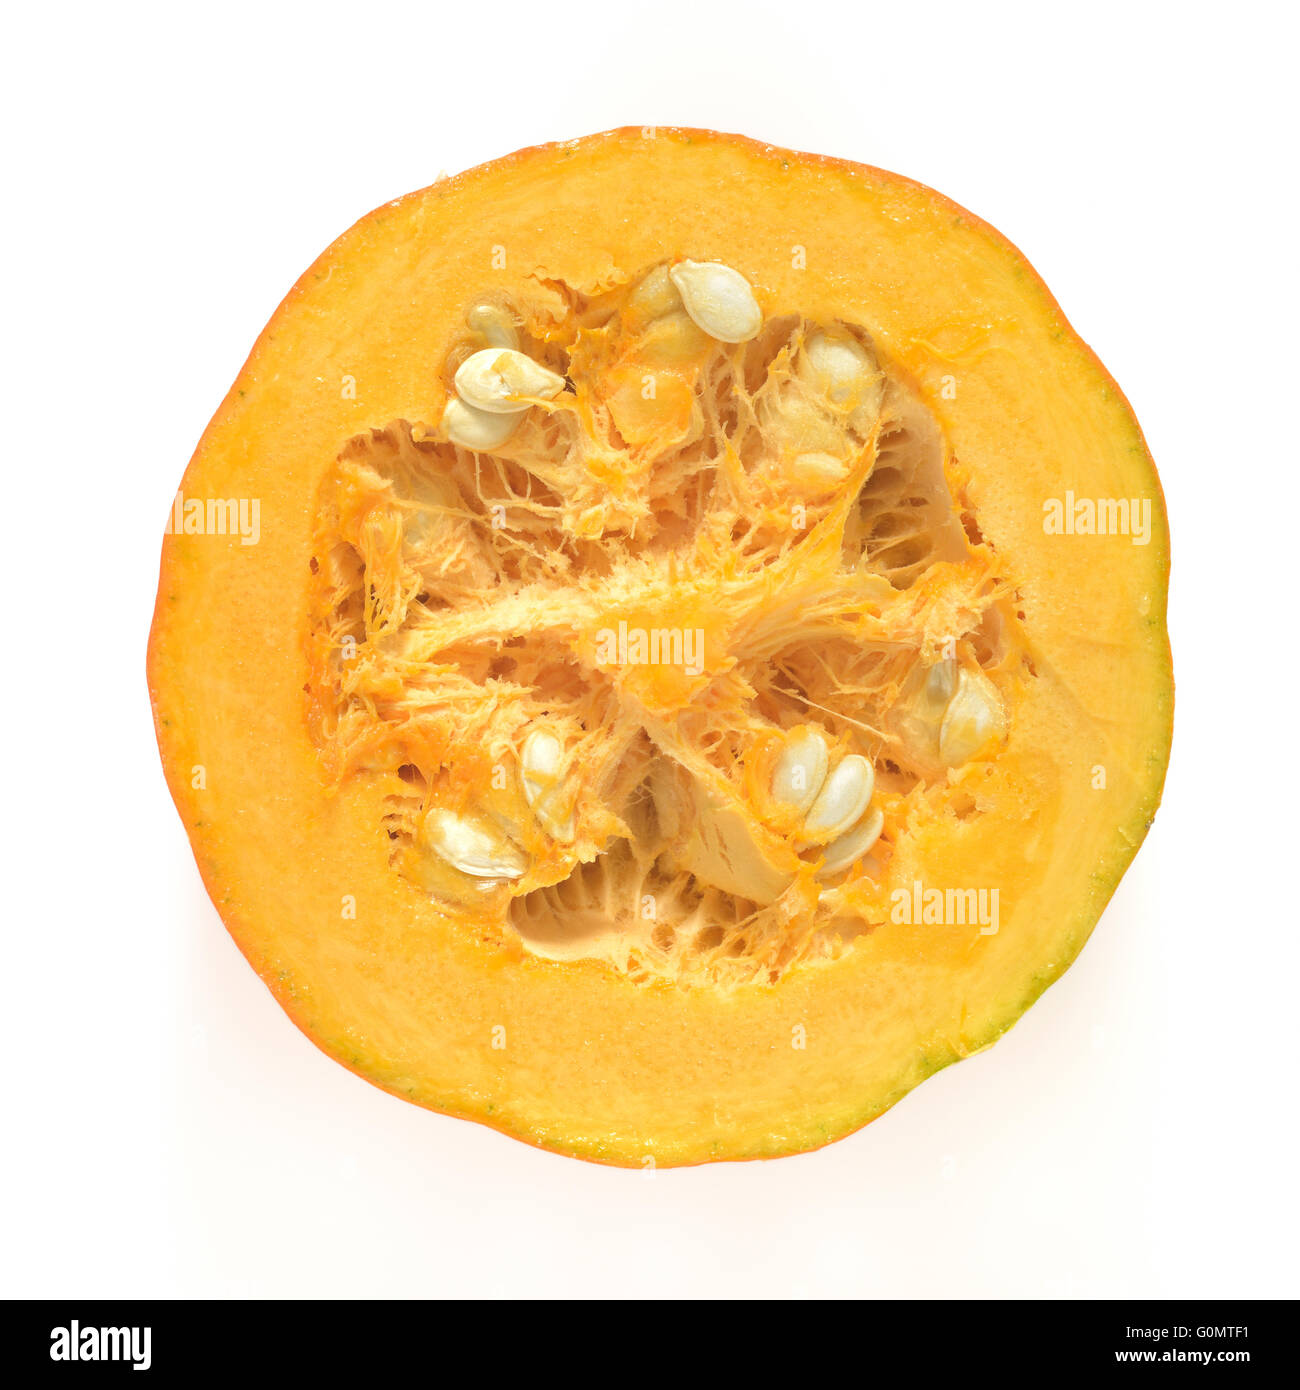 Top View of Cross section of Pumpkin Stock Photo